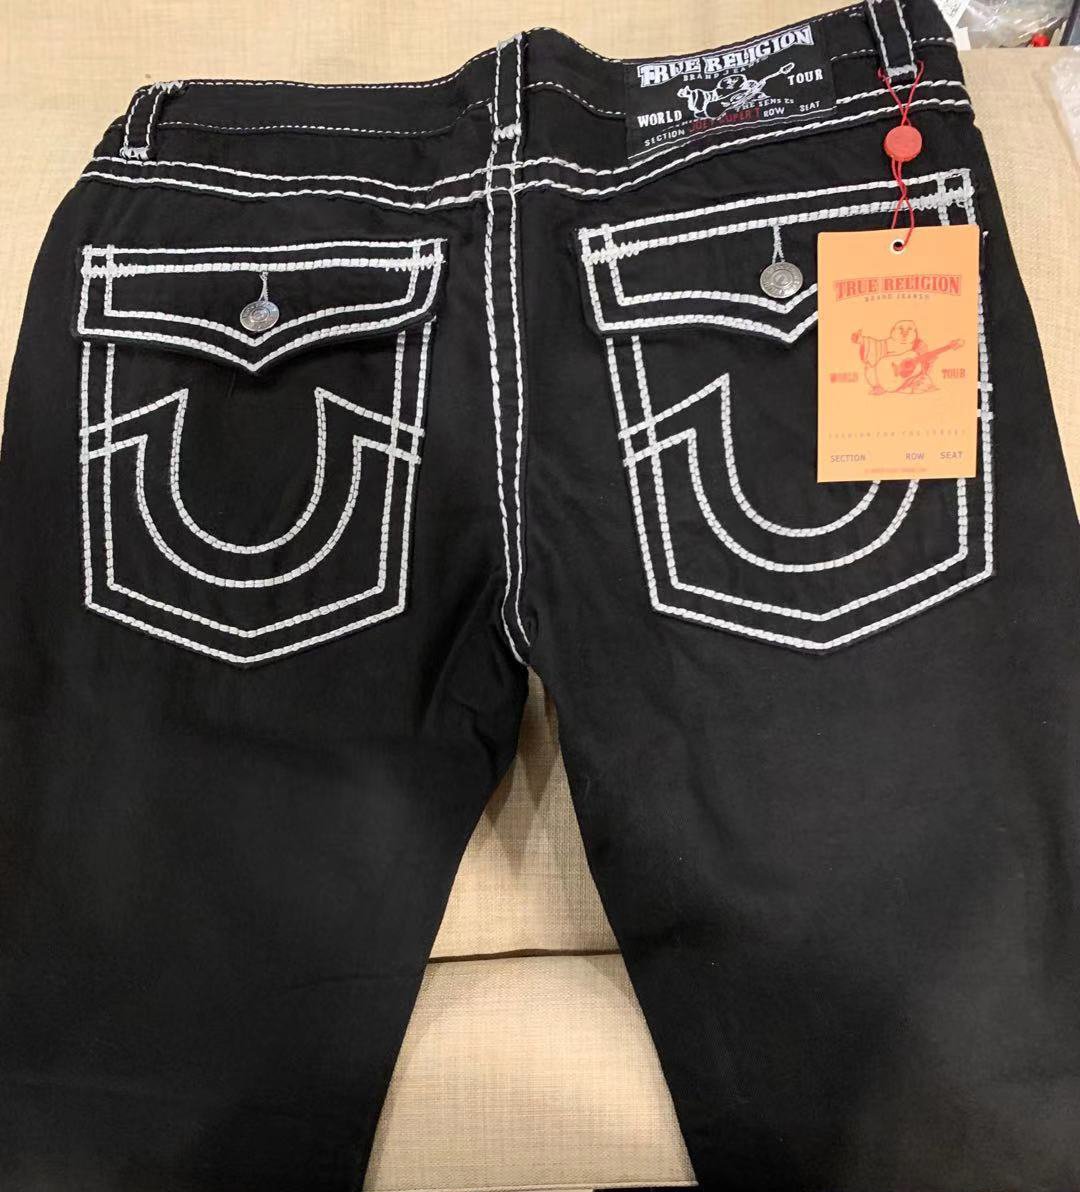 Authentic True Religion Jeans! All Sizes Available at Wholesale Prices!